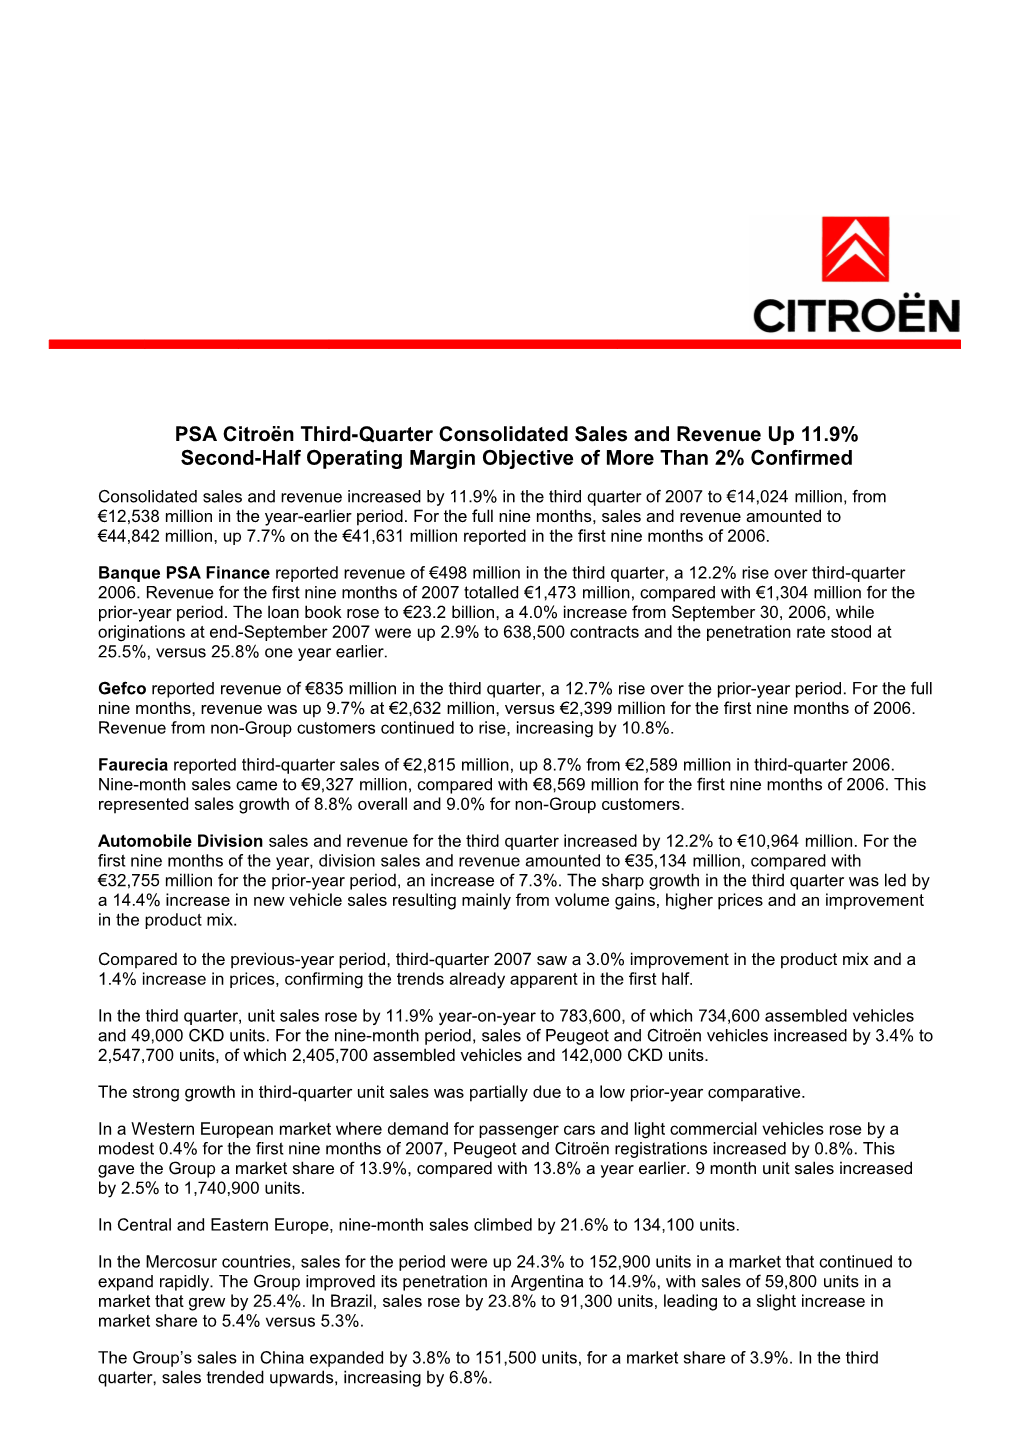 PSA Citroën Third-Quarter Consolidated Sales and Revenue up 11.9% Second-Half Operating